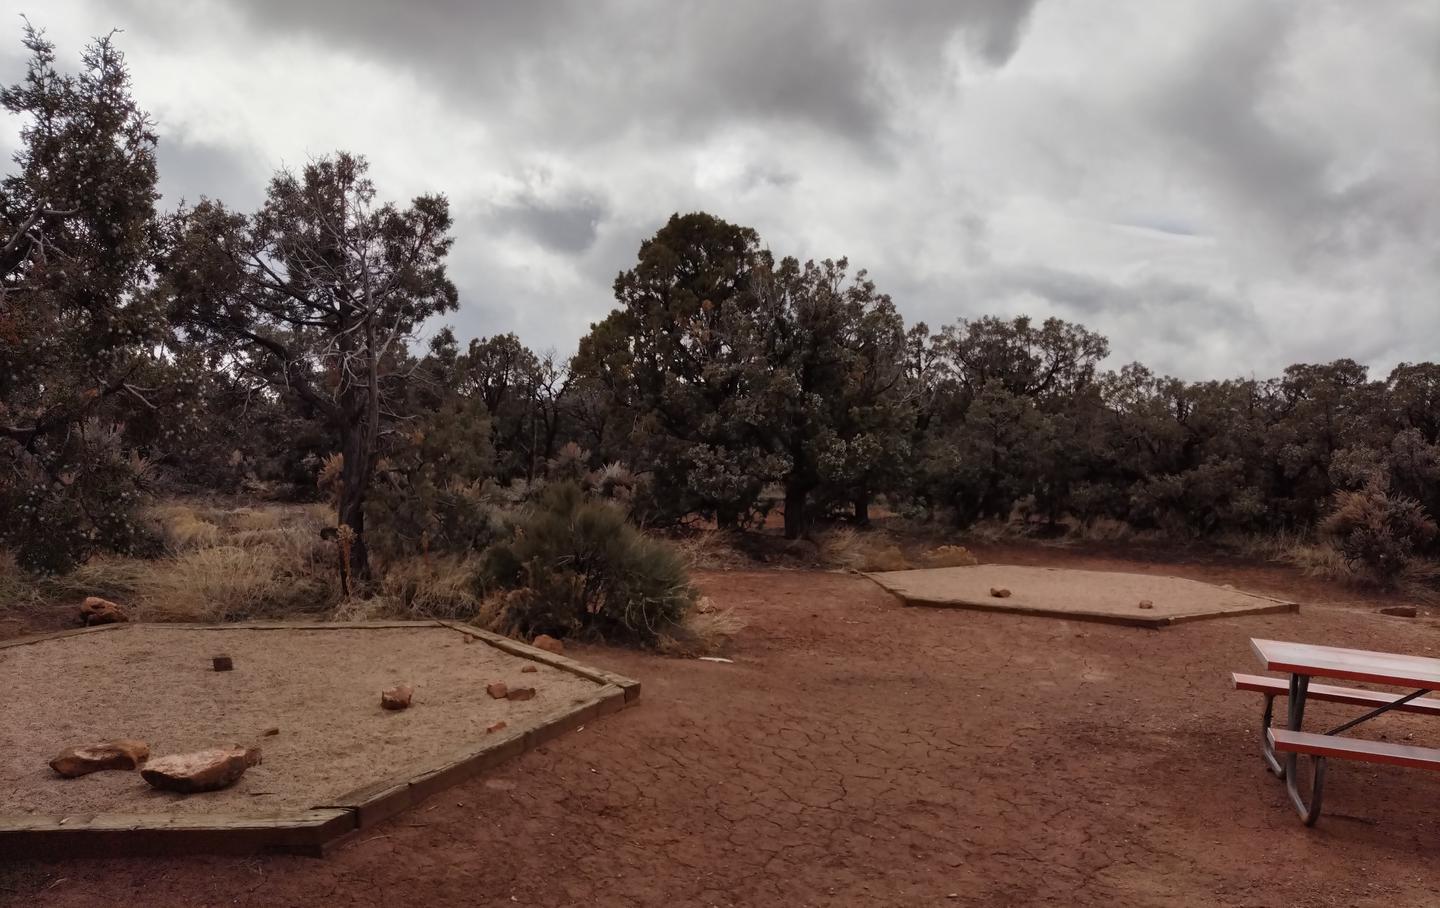 Two tent pads and a picnic table.Site 5 has two tent pads, a picnic table and a metal fire ring. The site is surrounded by a pinon-juniper forest.